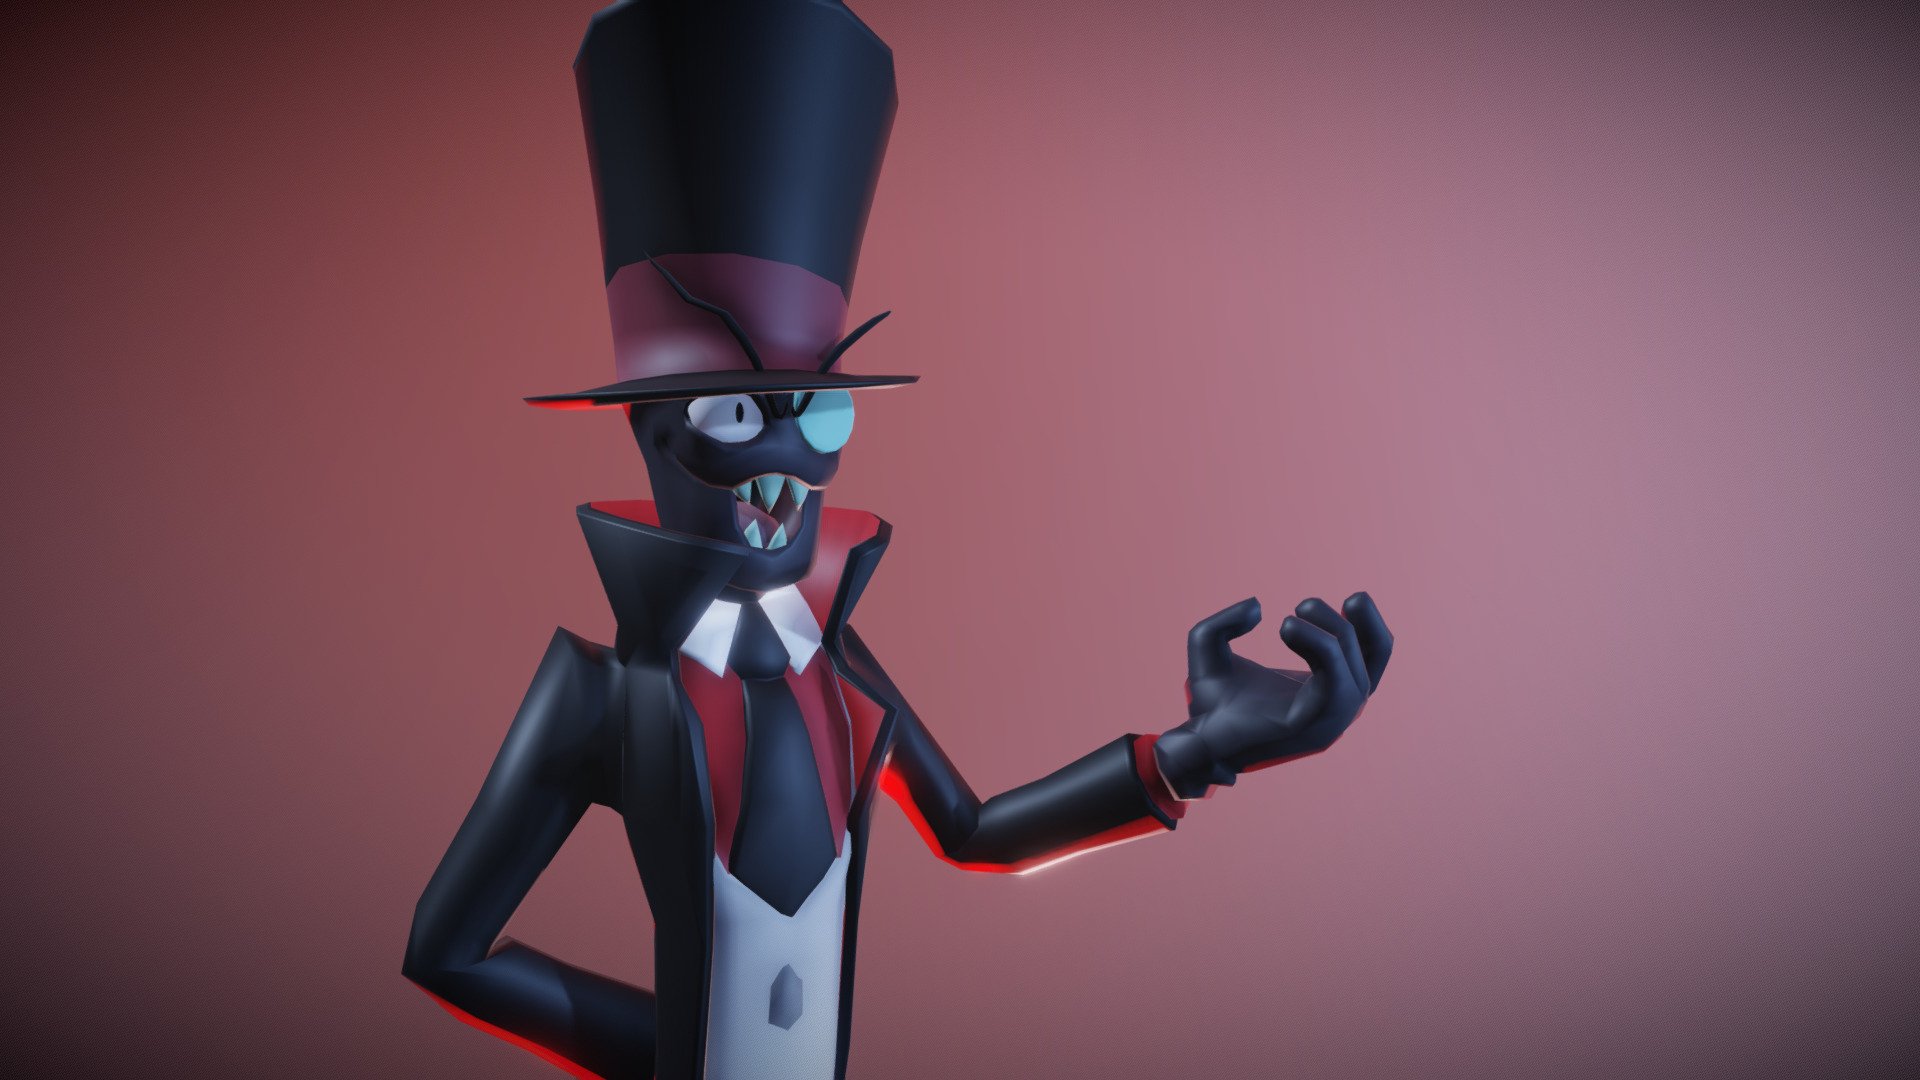 LORD BLACK HAT EMPEROR OF EVIL
Comes with 6 silly expressions and life-like bendiness.

From the Cartoon Villainous airing on Cartoon Network, created by Alan Ituriel 3d model